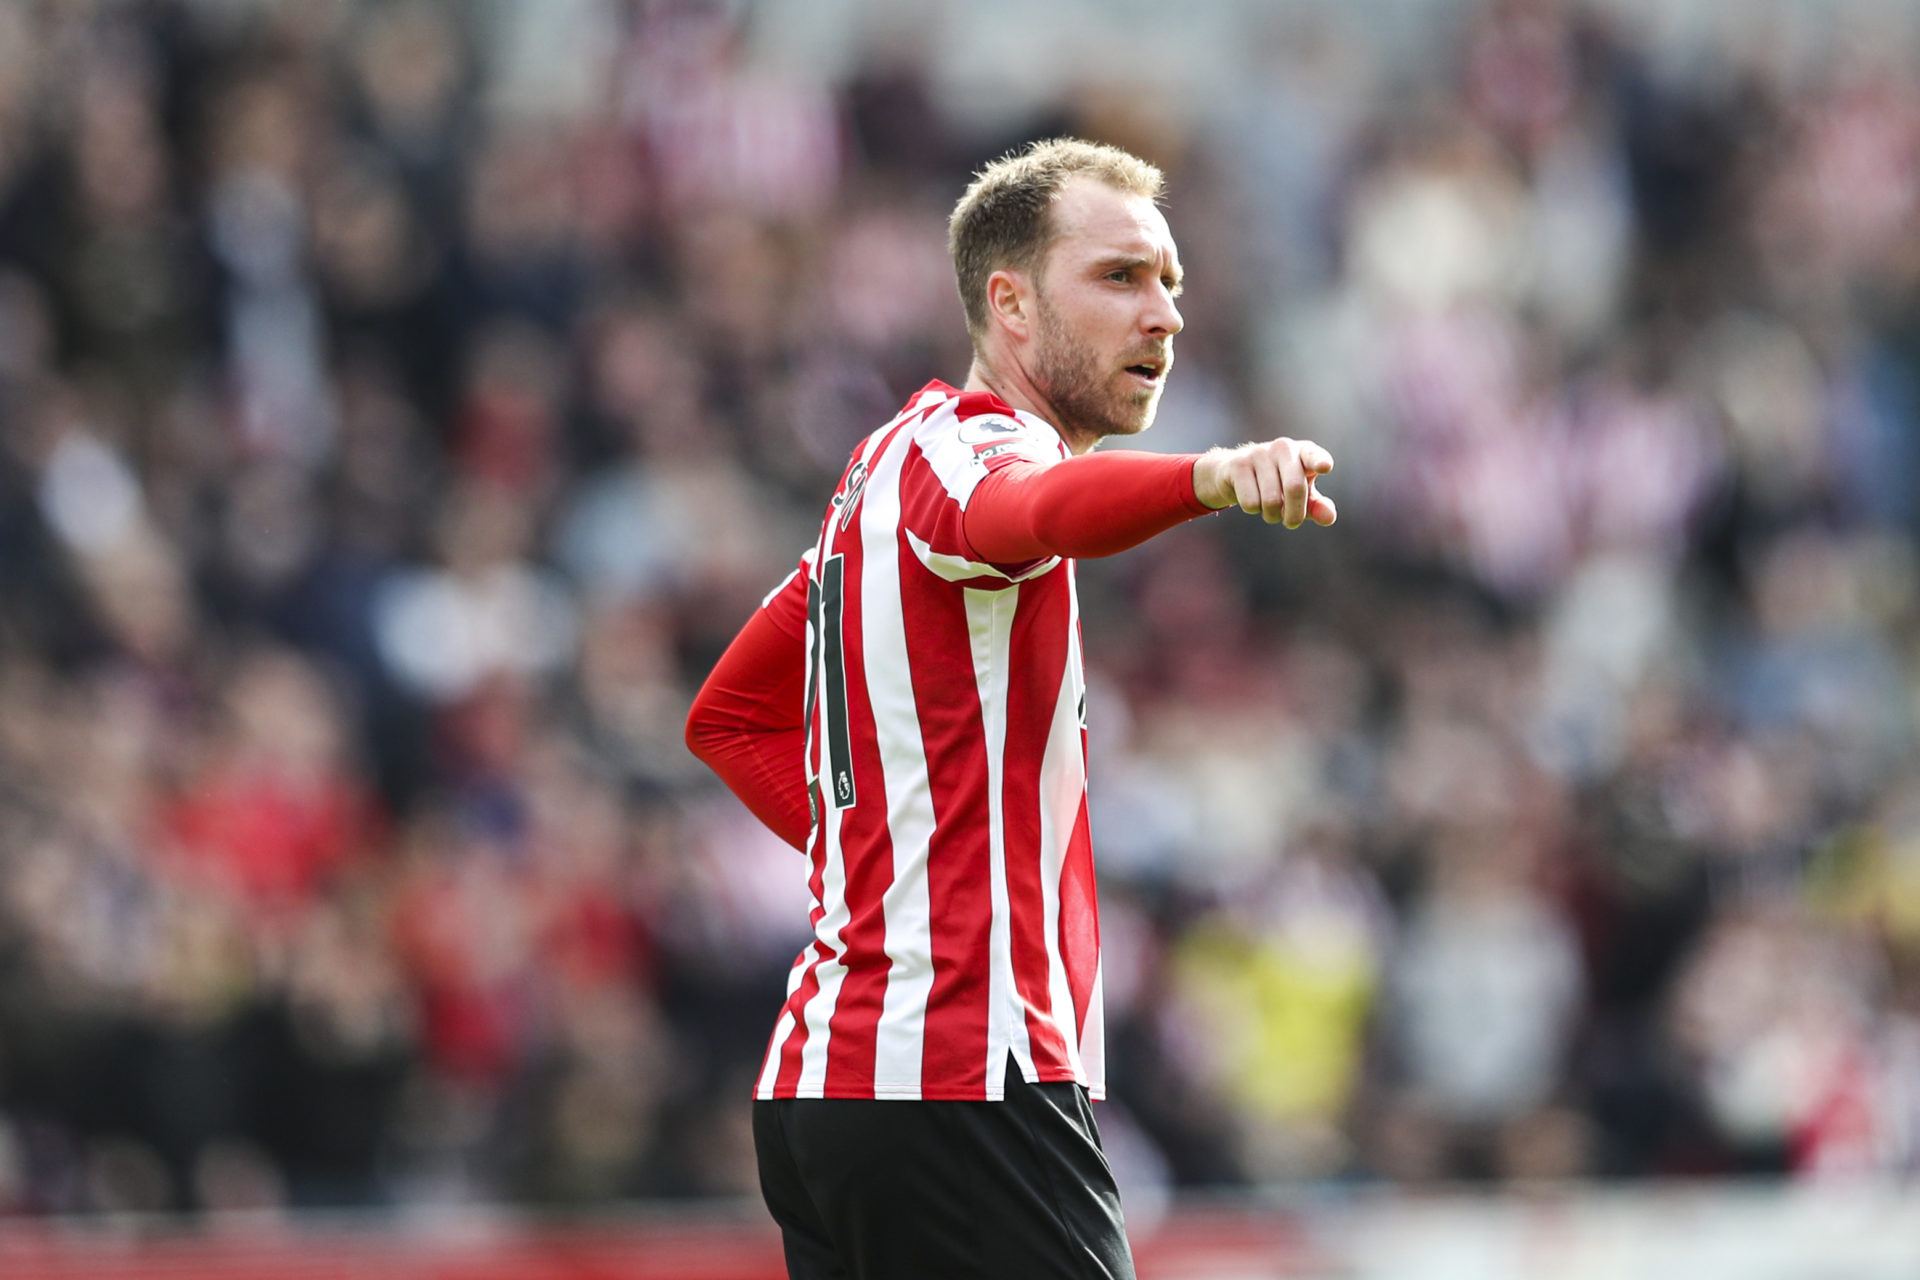 West Ham United are allegedly keeping tabs on the Christian Eriksen situation